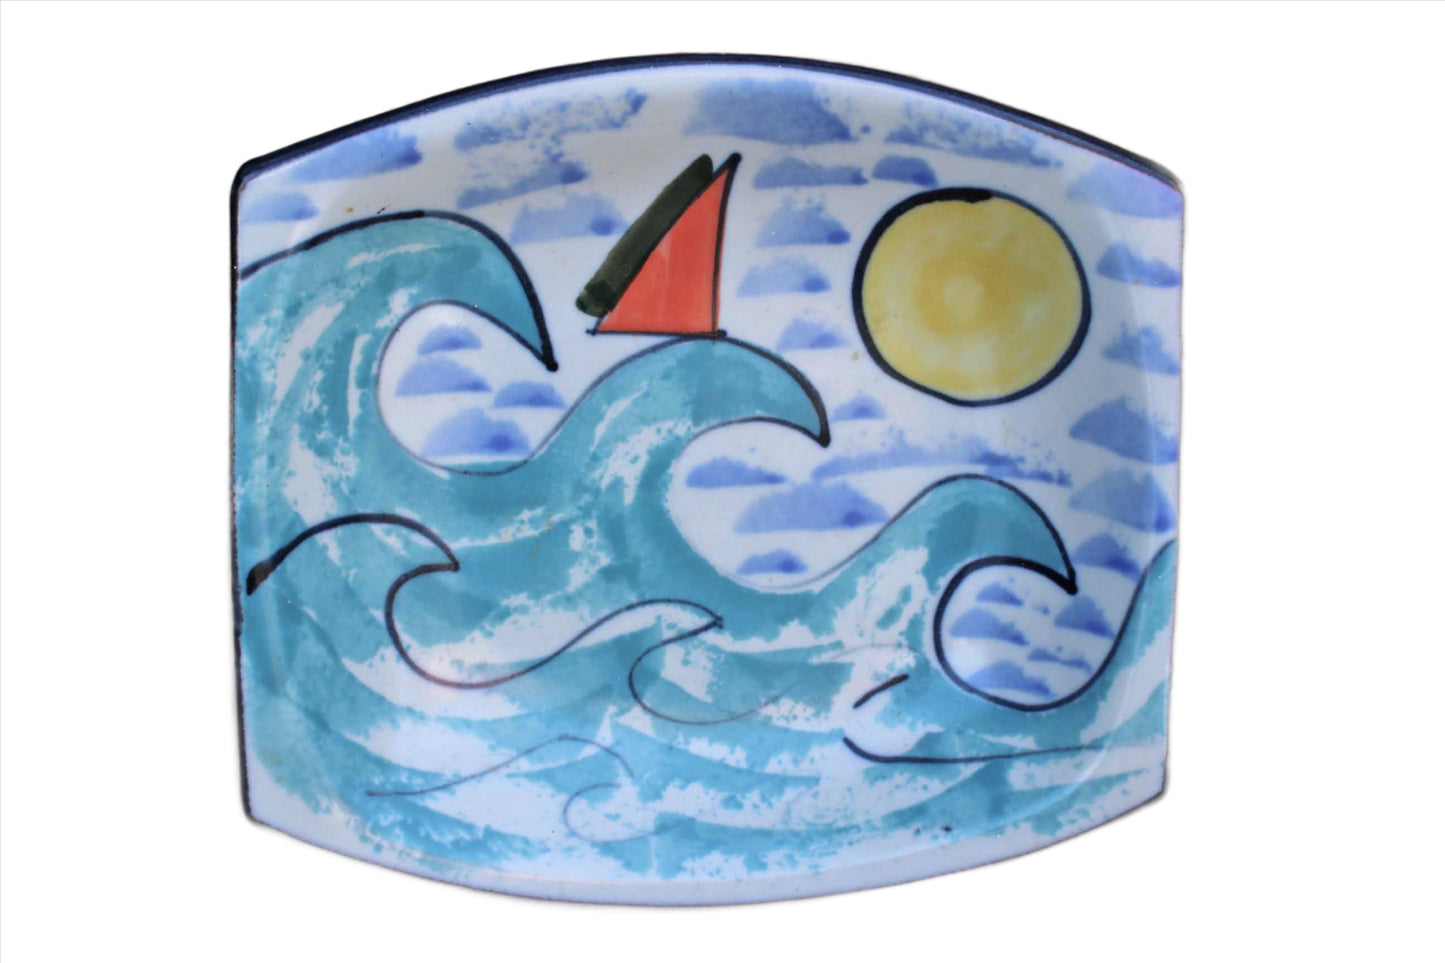 Heavy Handmade Ceramic Dish Decorated with Waves and Sun